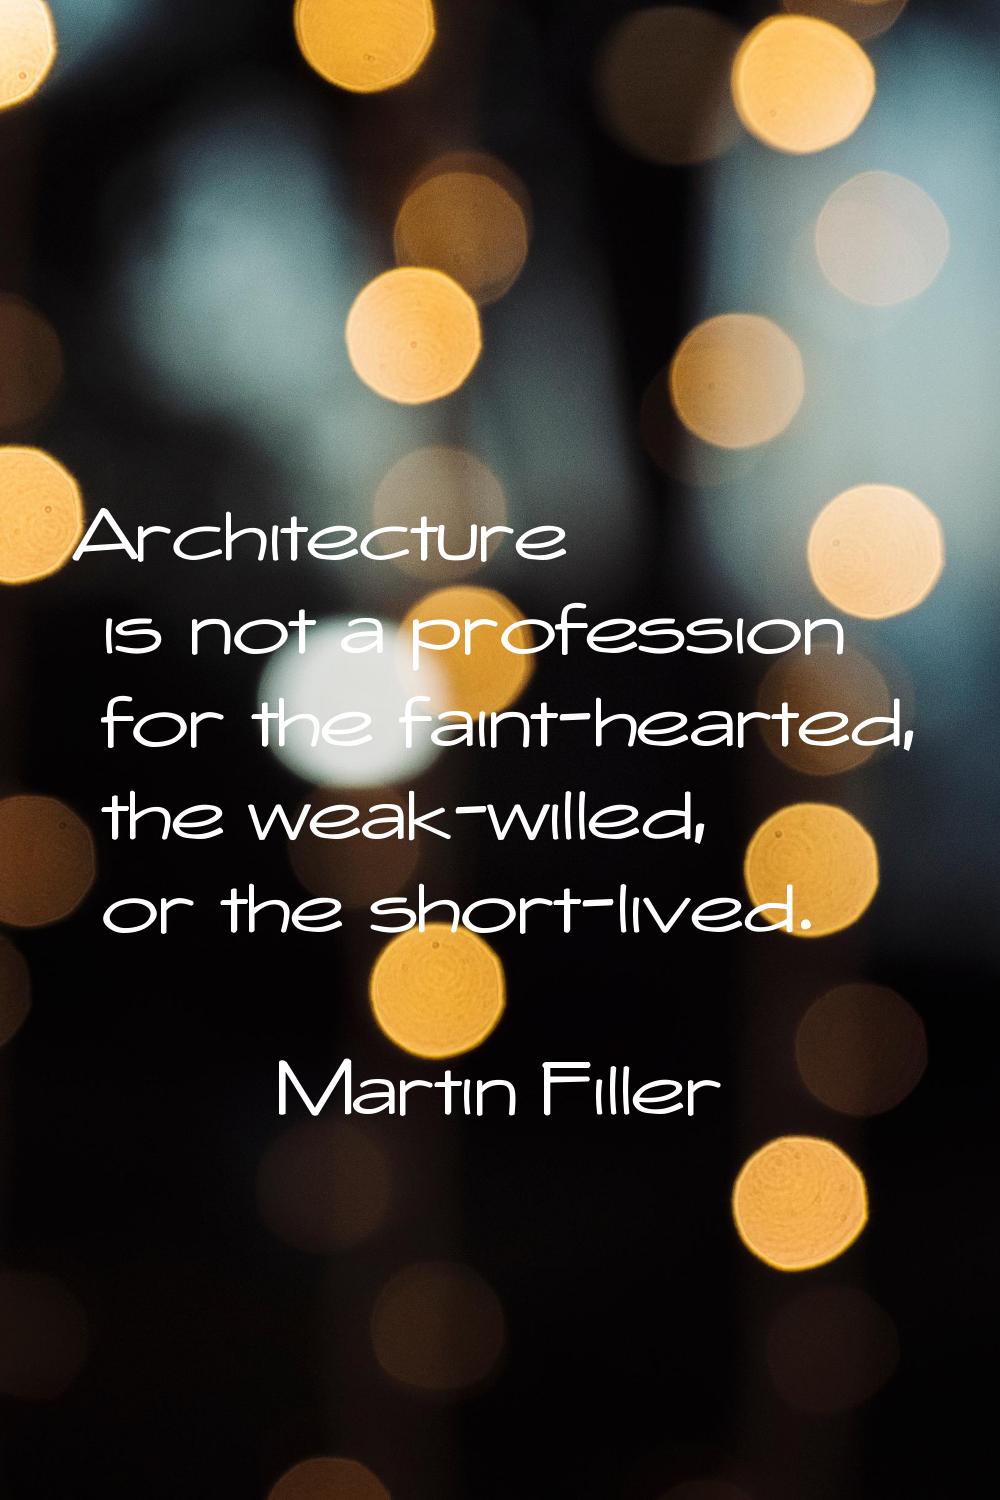 Architecture is not a profession for the faint-hearted, the weak-willed, or the short-lived.